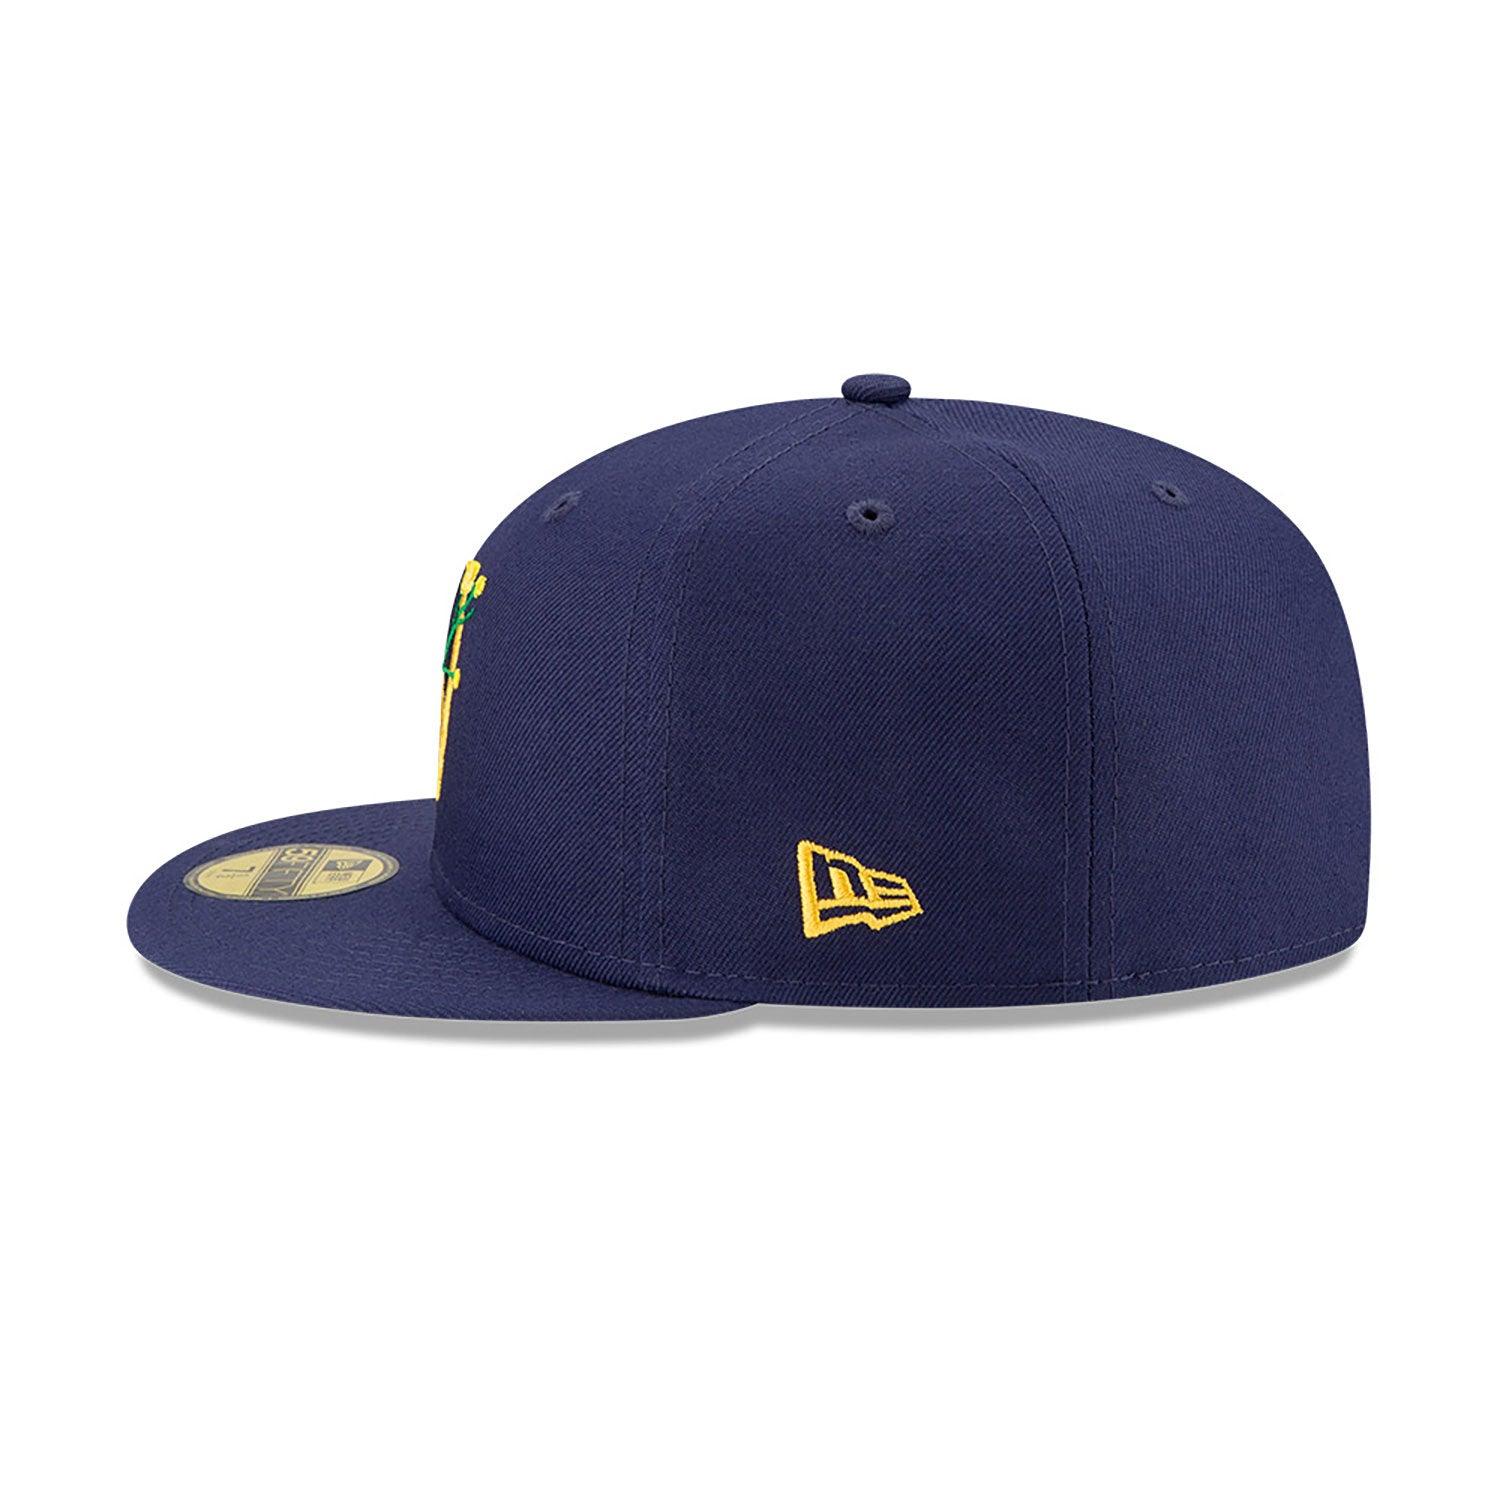 NEW ERA 59FIFTY MLB MILWAUKEE BREWERS SIDE PATCH BLOOM NAVY / SOFT YELLOW UV FITTED CAP - FAM